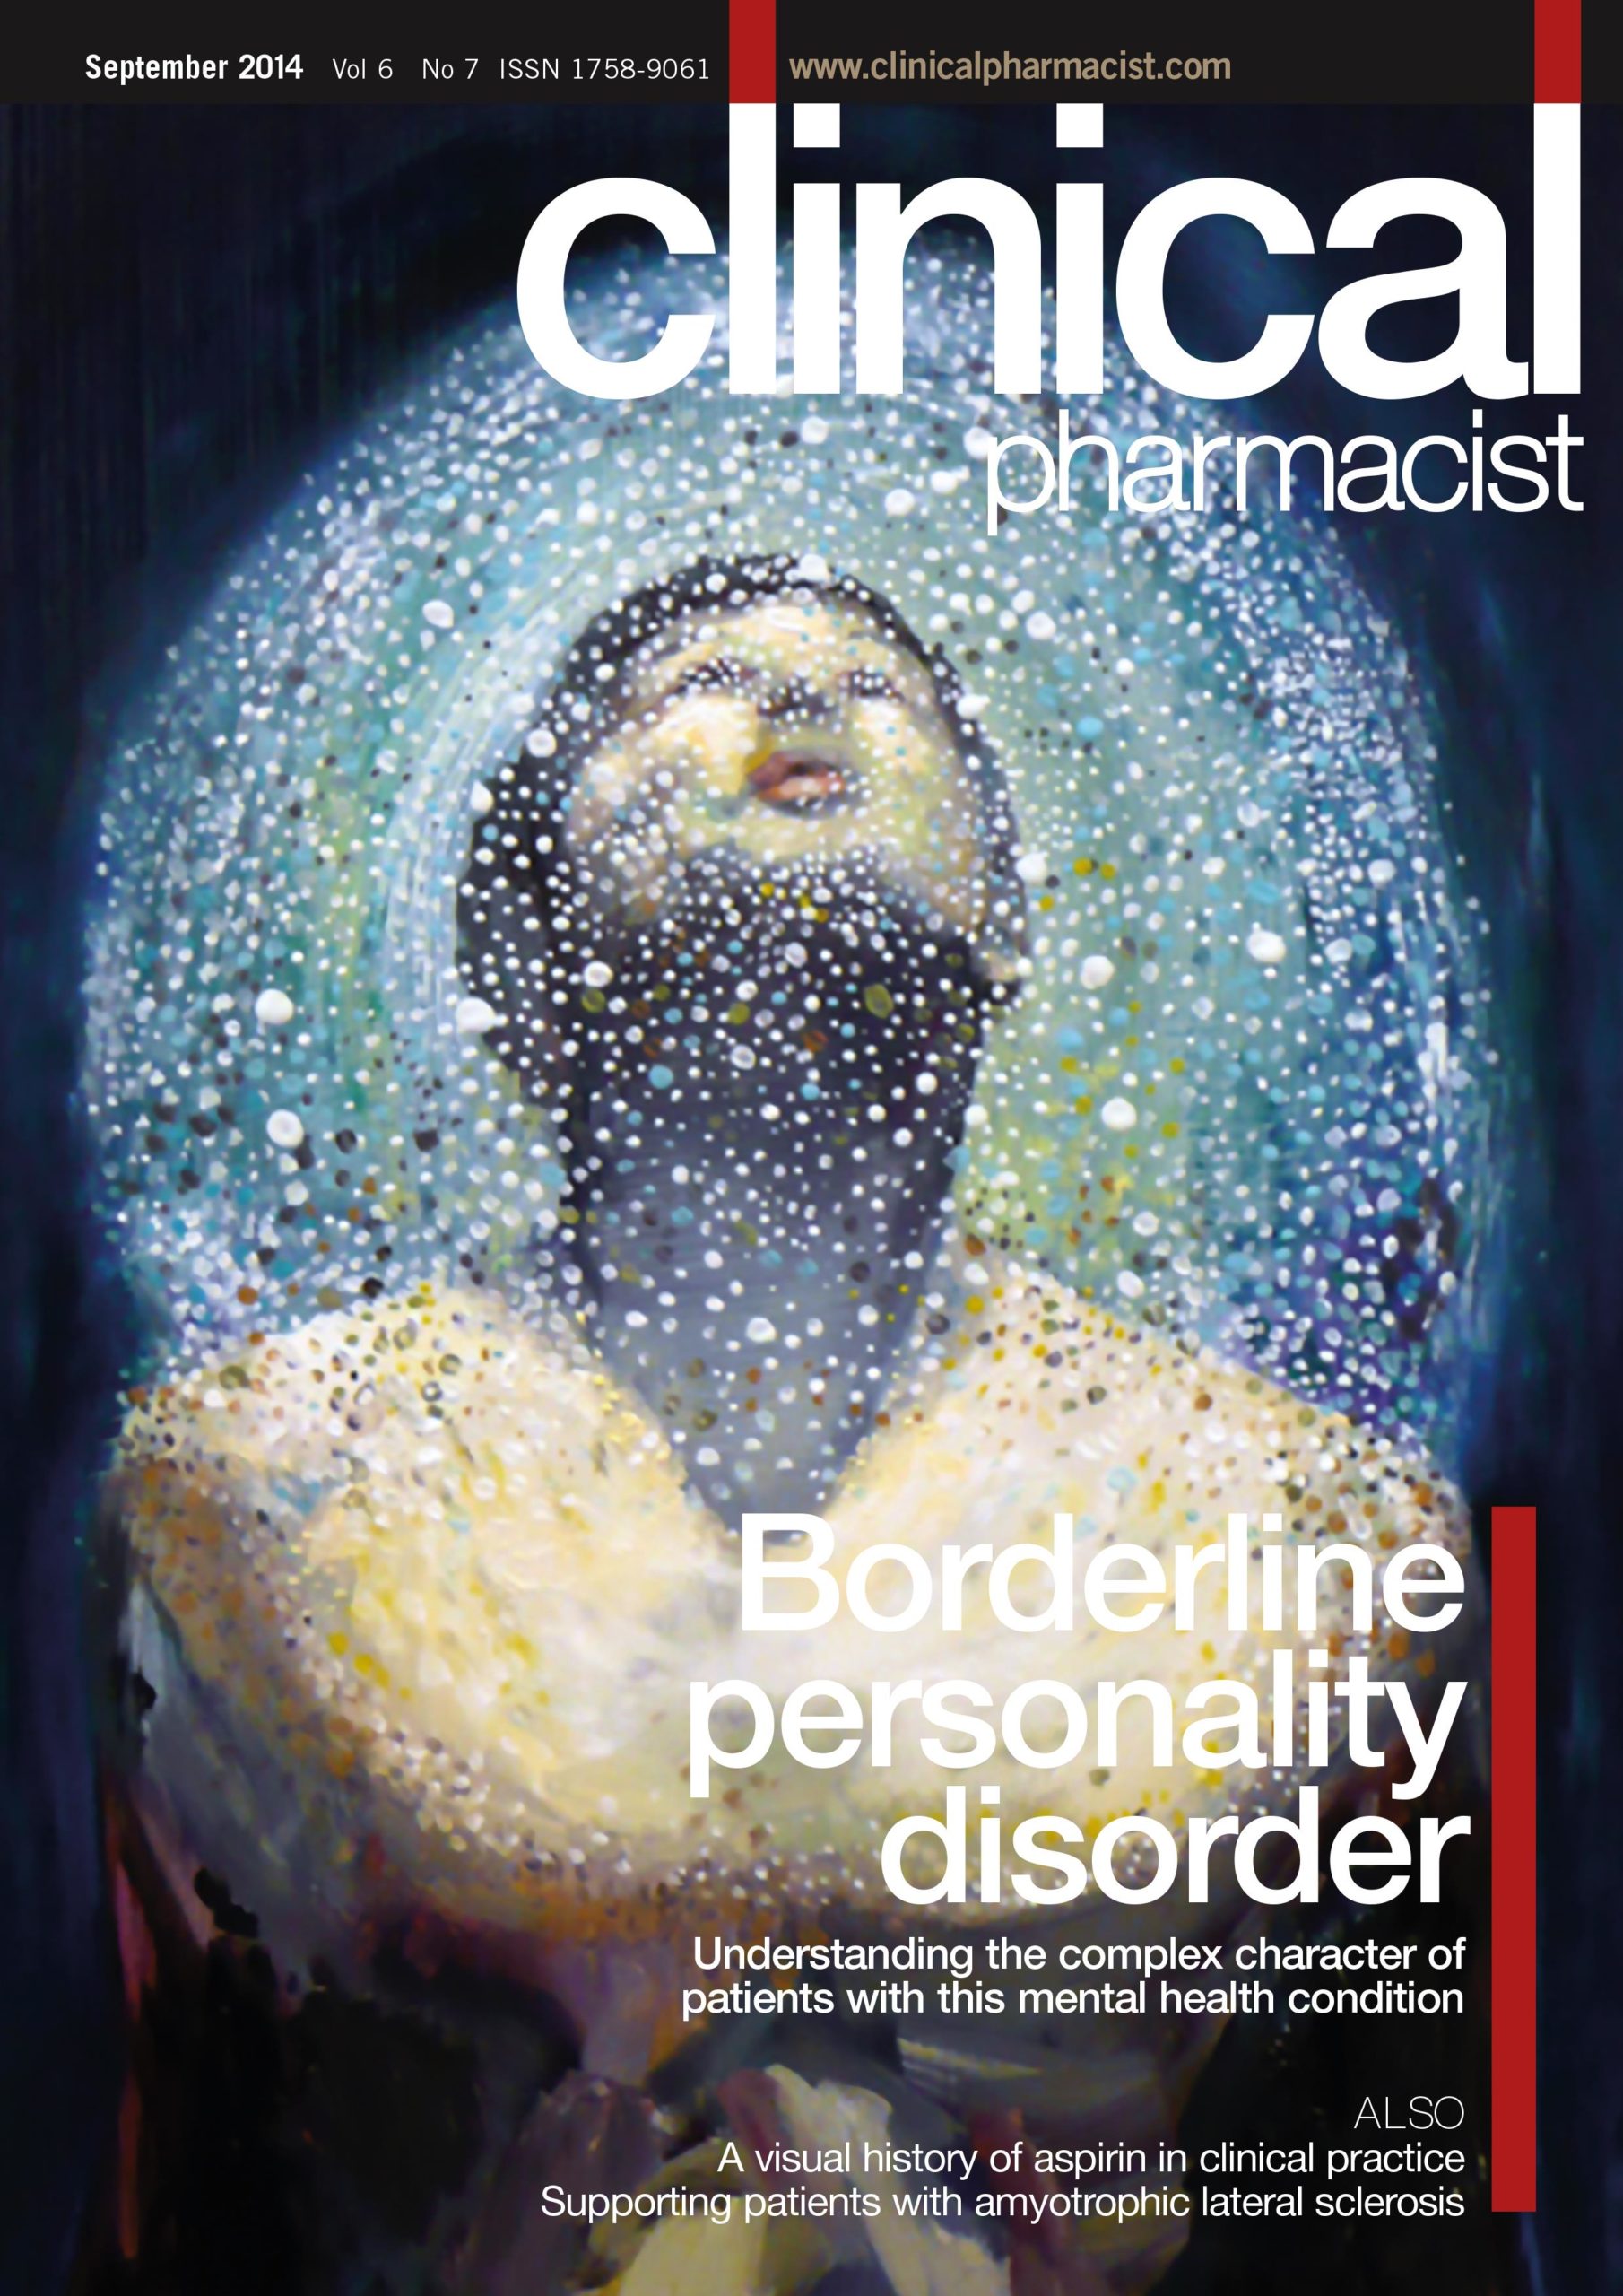 Publication issue cover for CP, September 2014, Vol 6, No 7